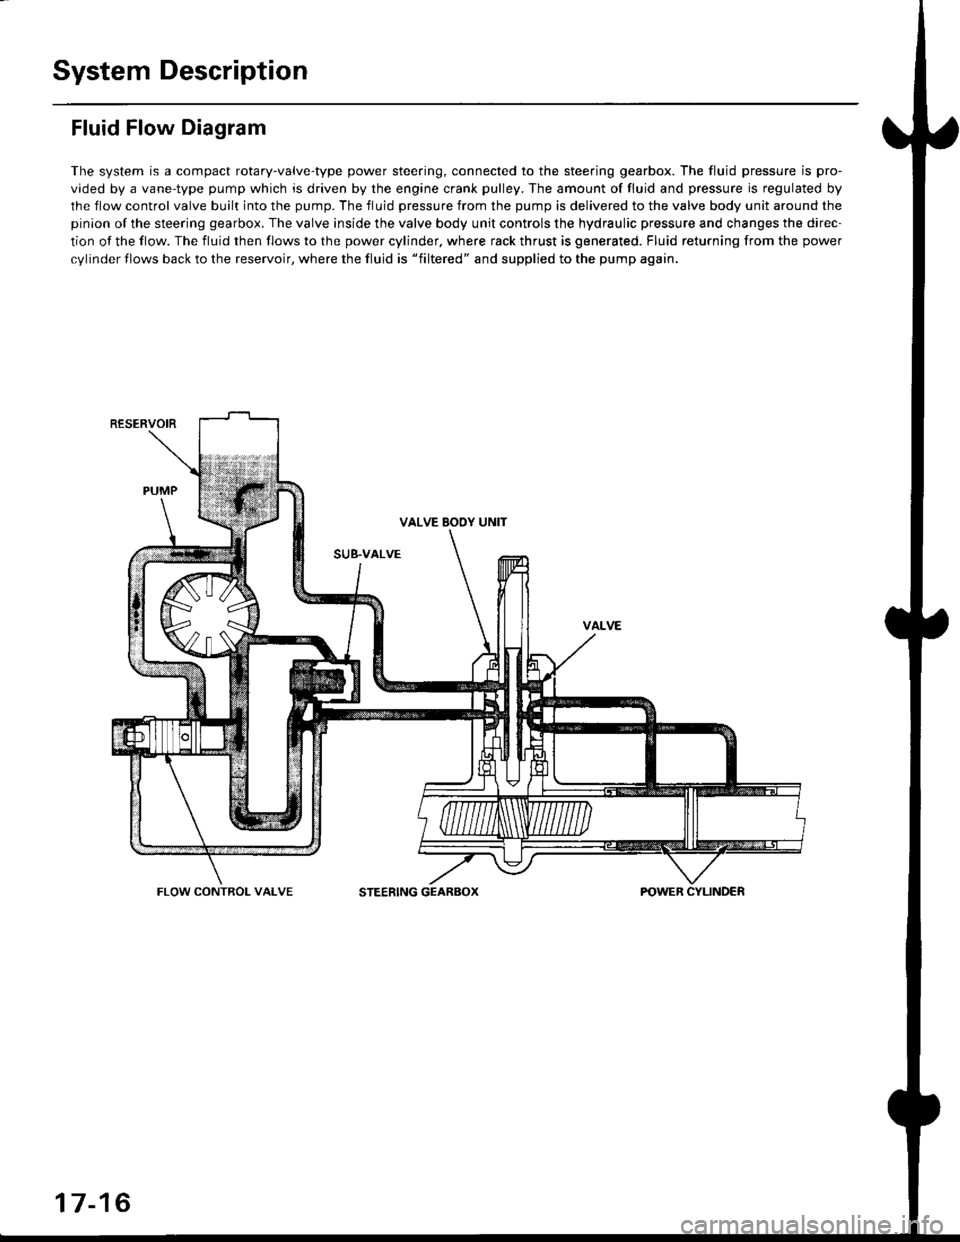 HONDA CIVIC 1997 6.G Workshop Manual System Description
Fluid Flow Diagram
The system is a compact rotary-valve-type power steering, connected to the steering gearbox. The fluid pressure is pro-
vided by a vane-type pump which is driven 